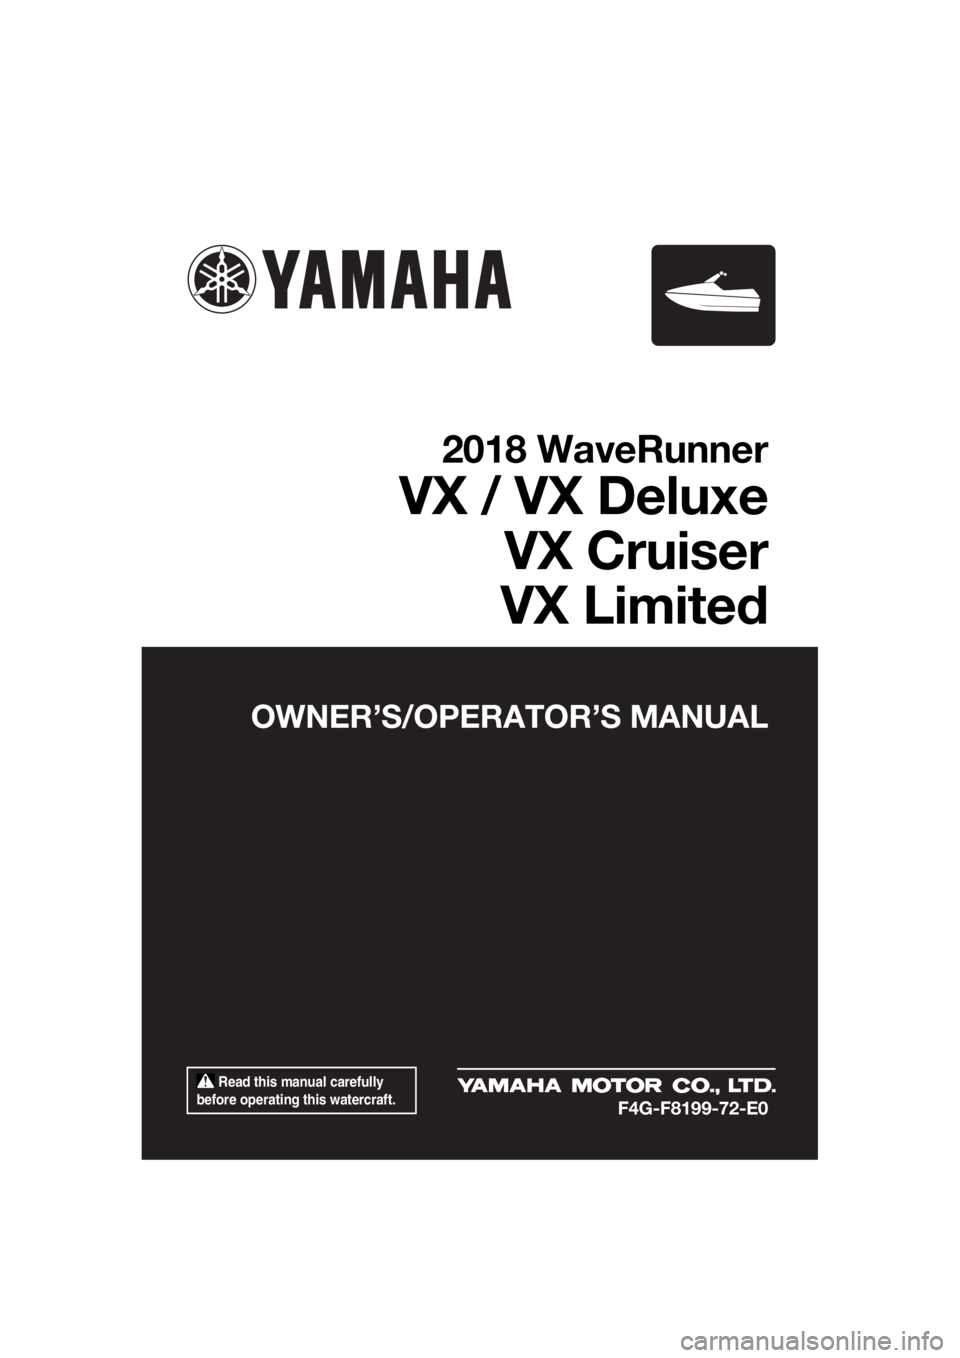 YAMAHA VX CRUISER 2018  Owners Manual  Read this manual carefully 
before operating this watercraft.
OWNER’S/OPERATOR’S MANUAL
2018 WaveRunner
VX / VX Deluxe
VX Cruiser
VX Limited
F4G-F8199-72-E0
UF4G72E0.book  Page 1  Tuesday, August